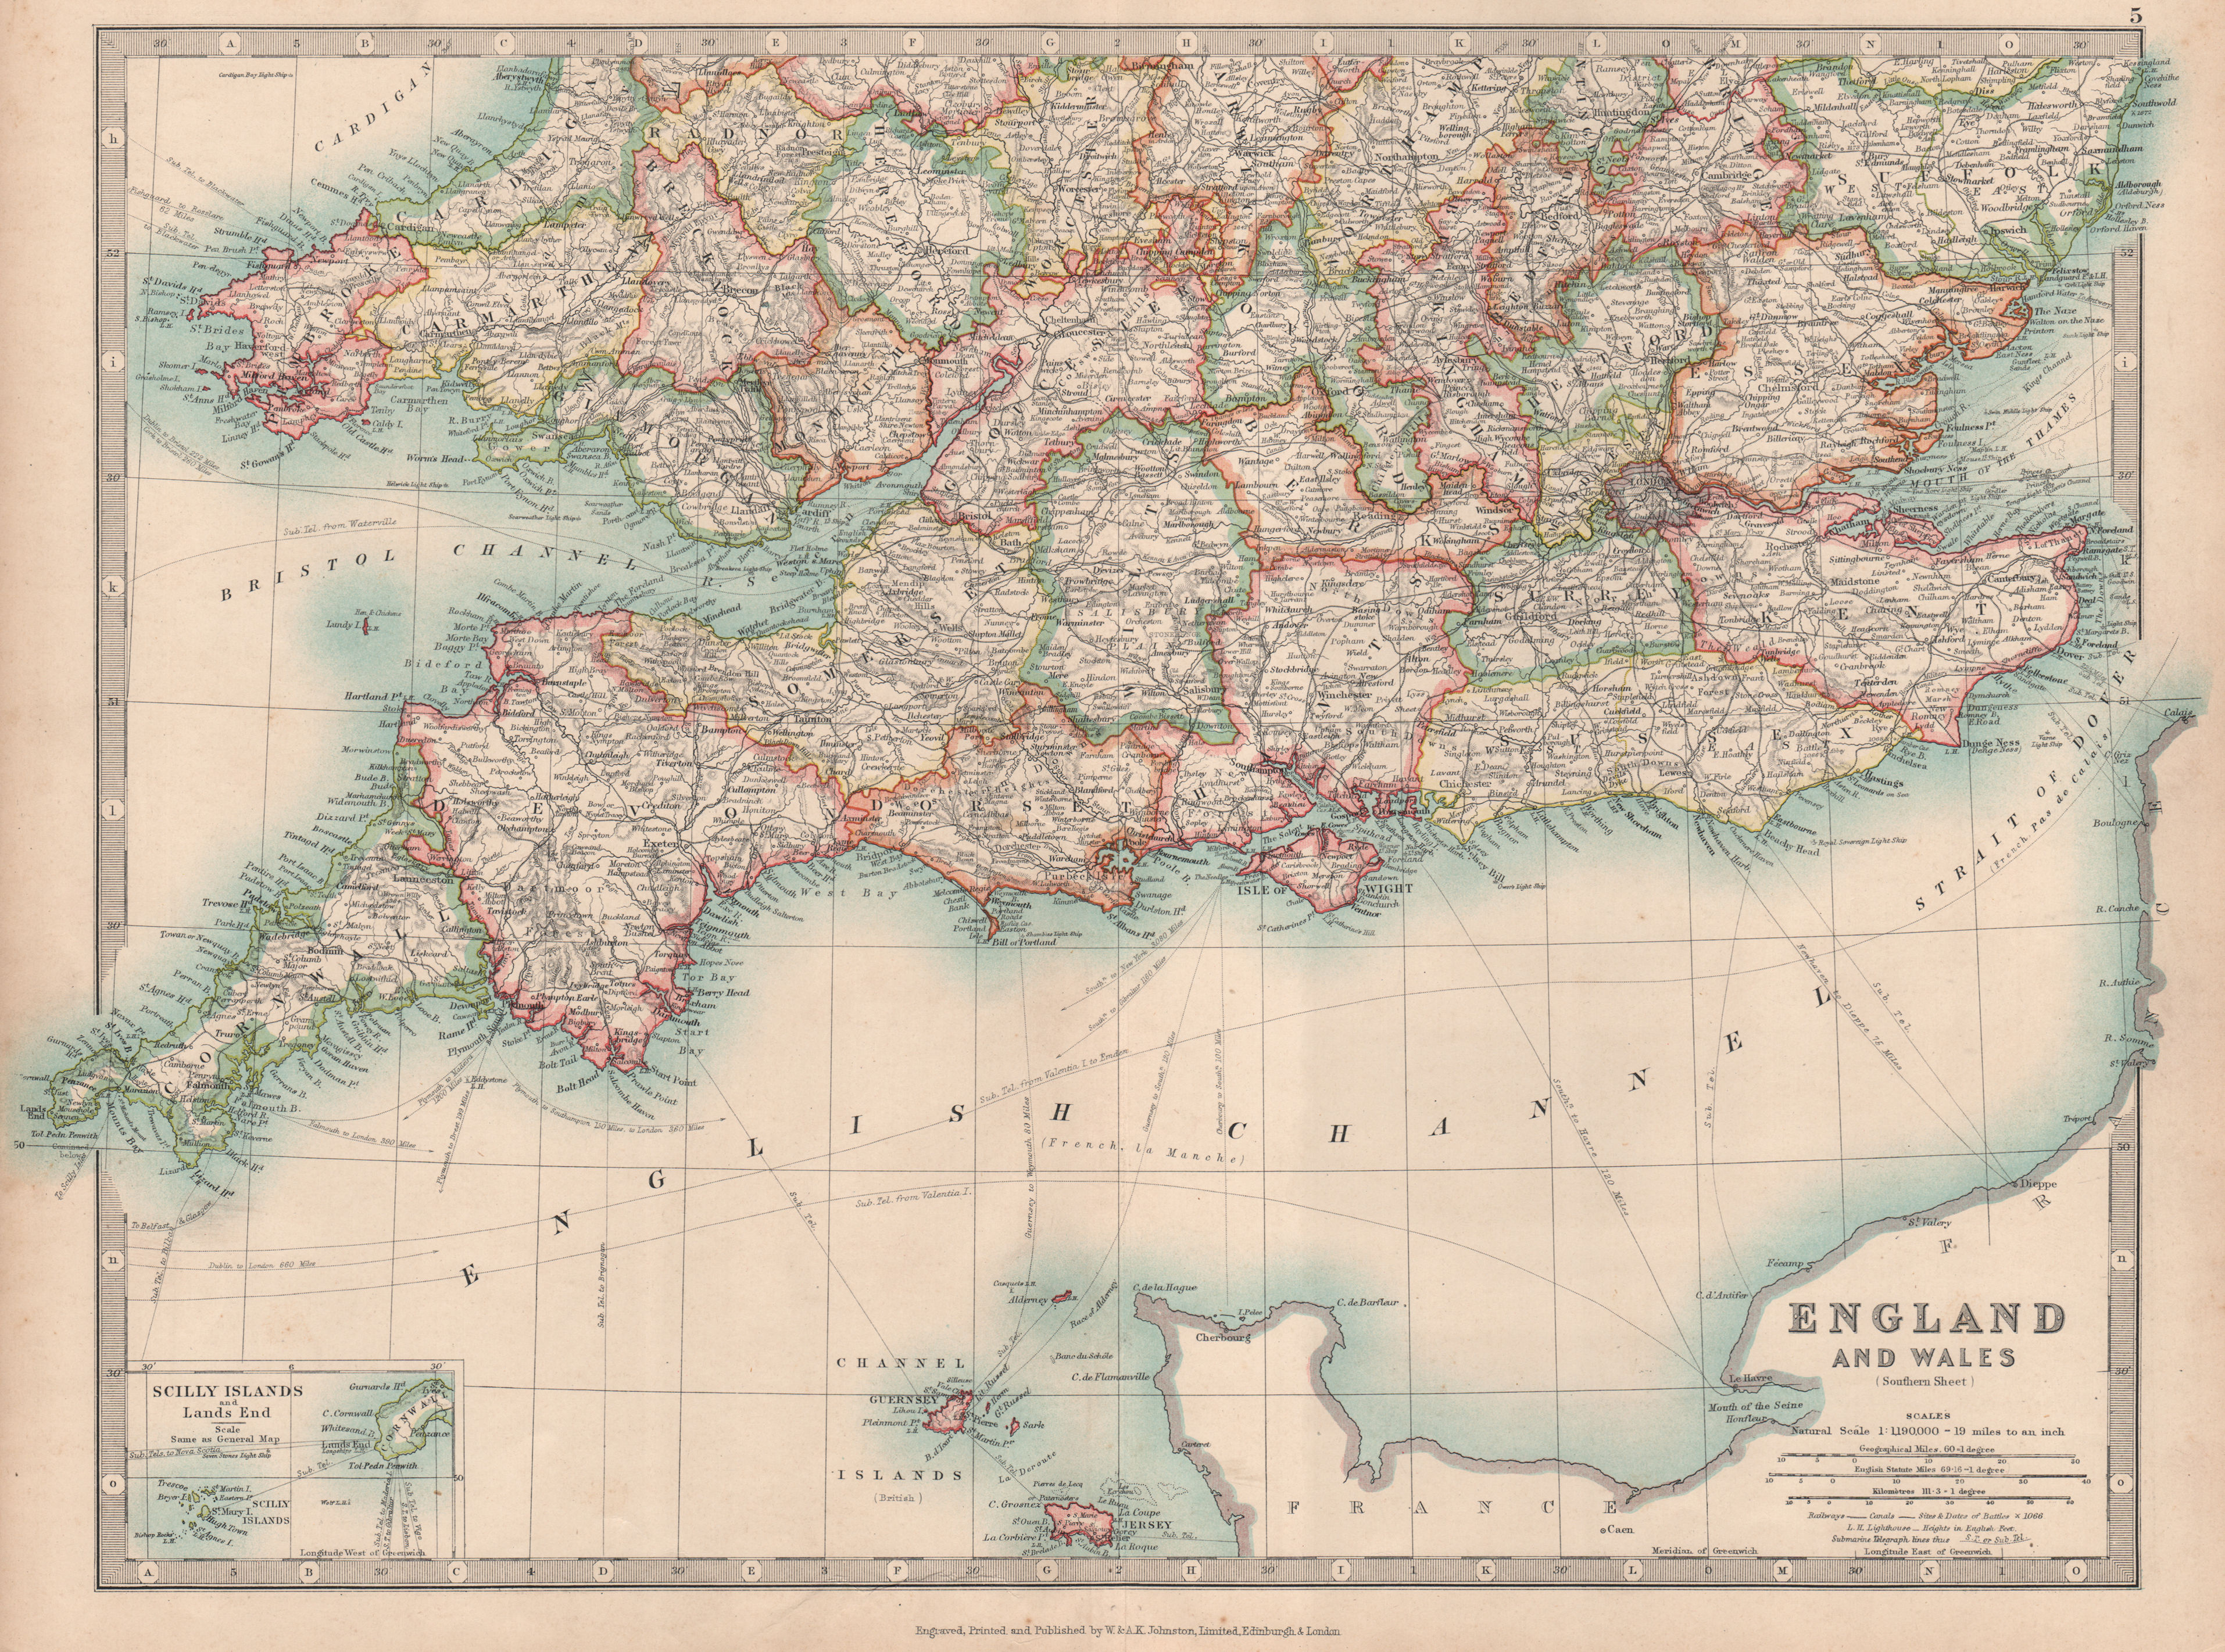 Associate Product SOUTHERN ENGLAND & WALES. Shows Worcestershire enclaves. JOHNSTON 1912 old map